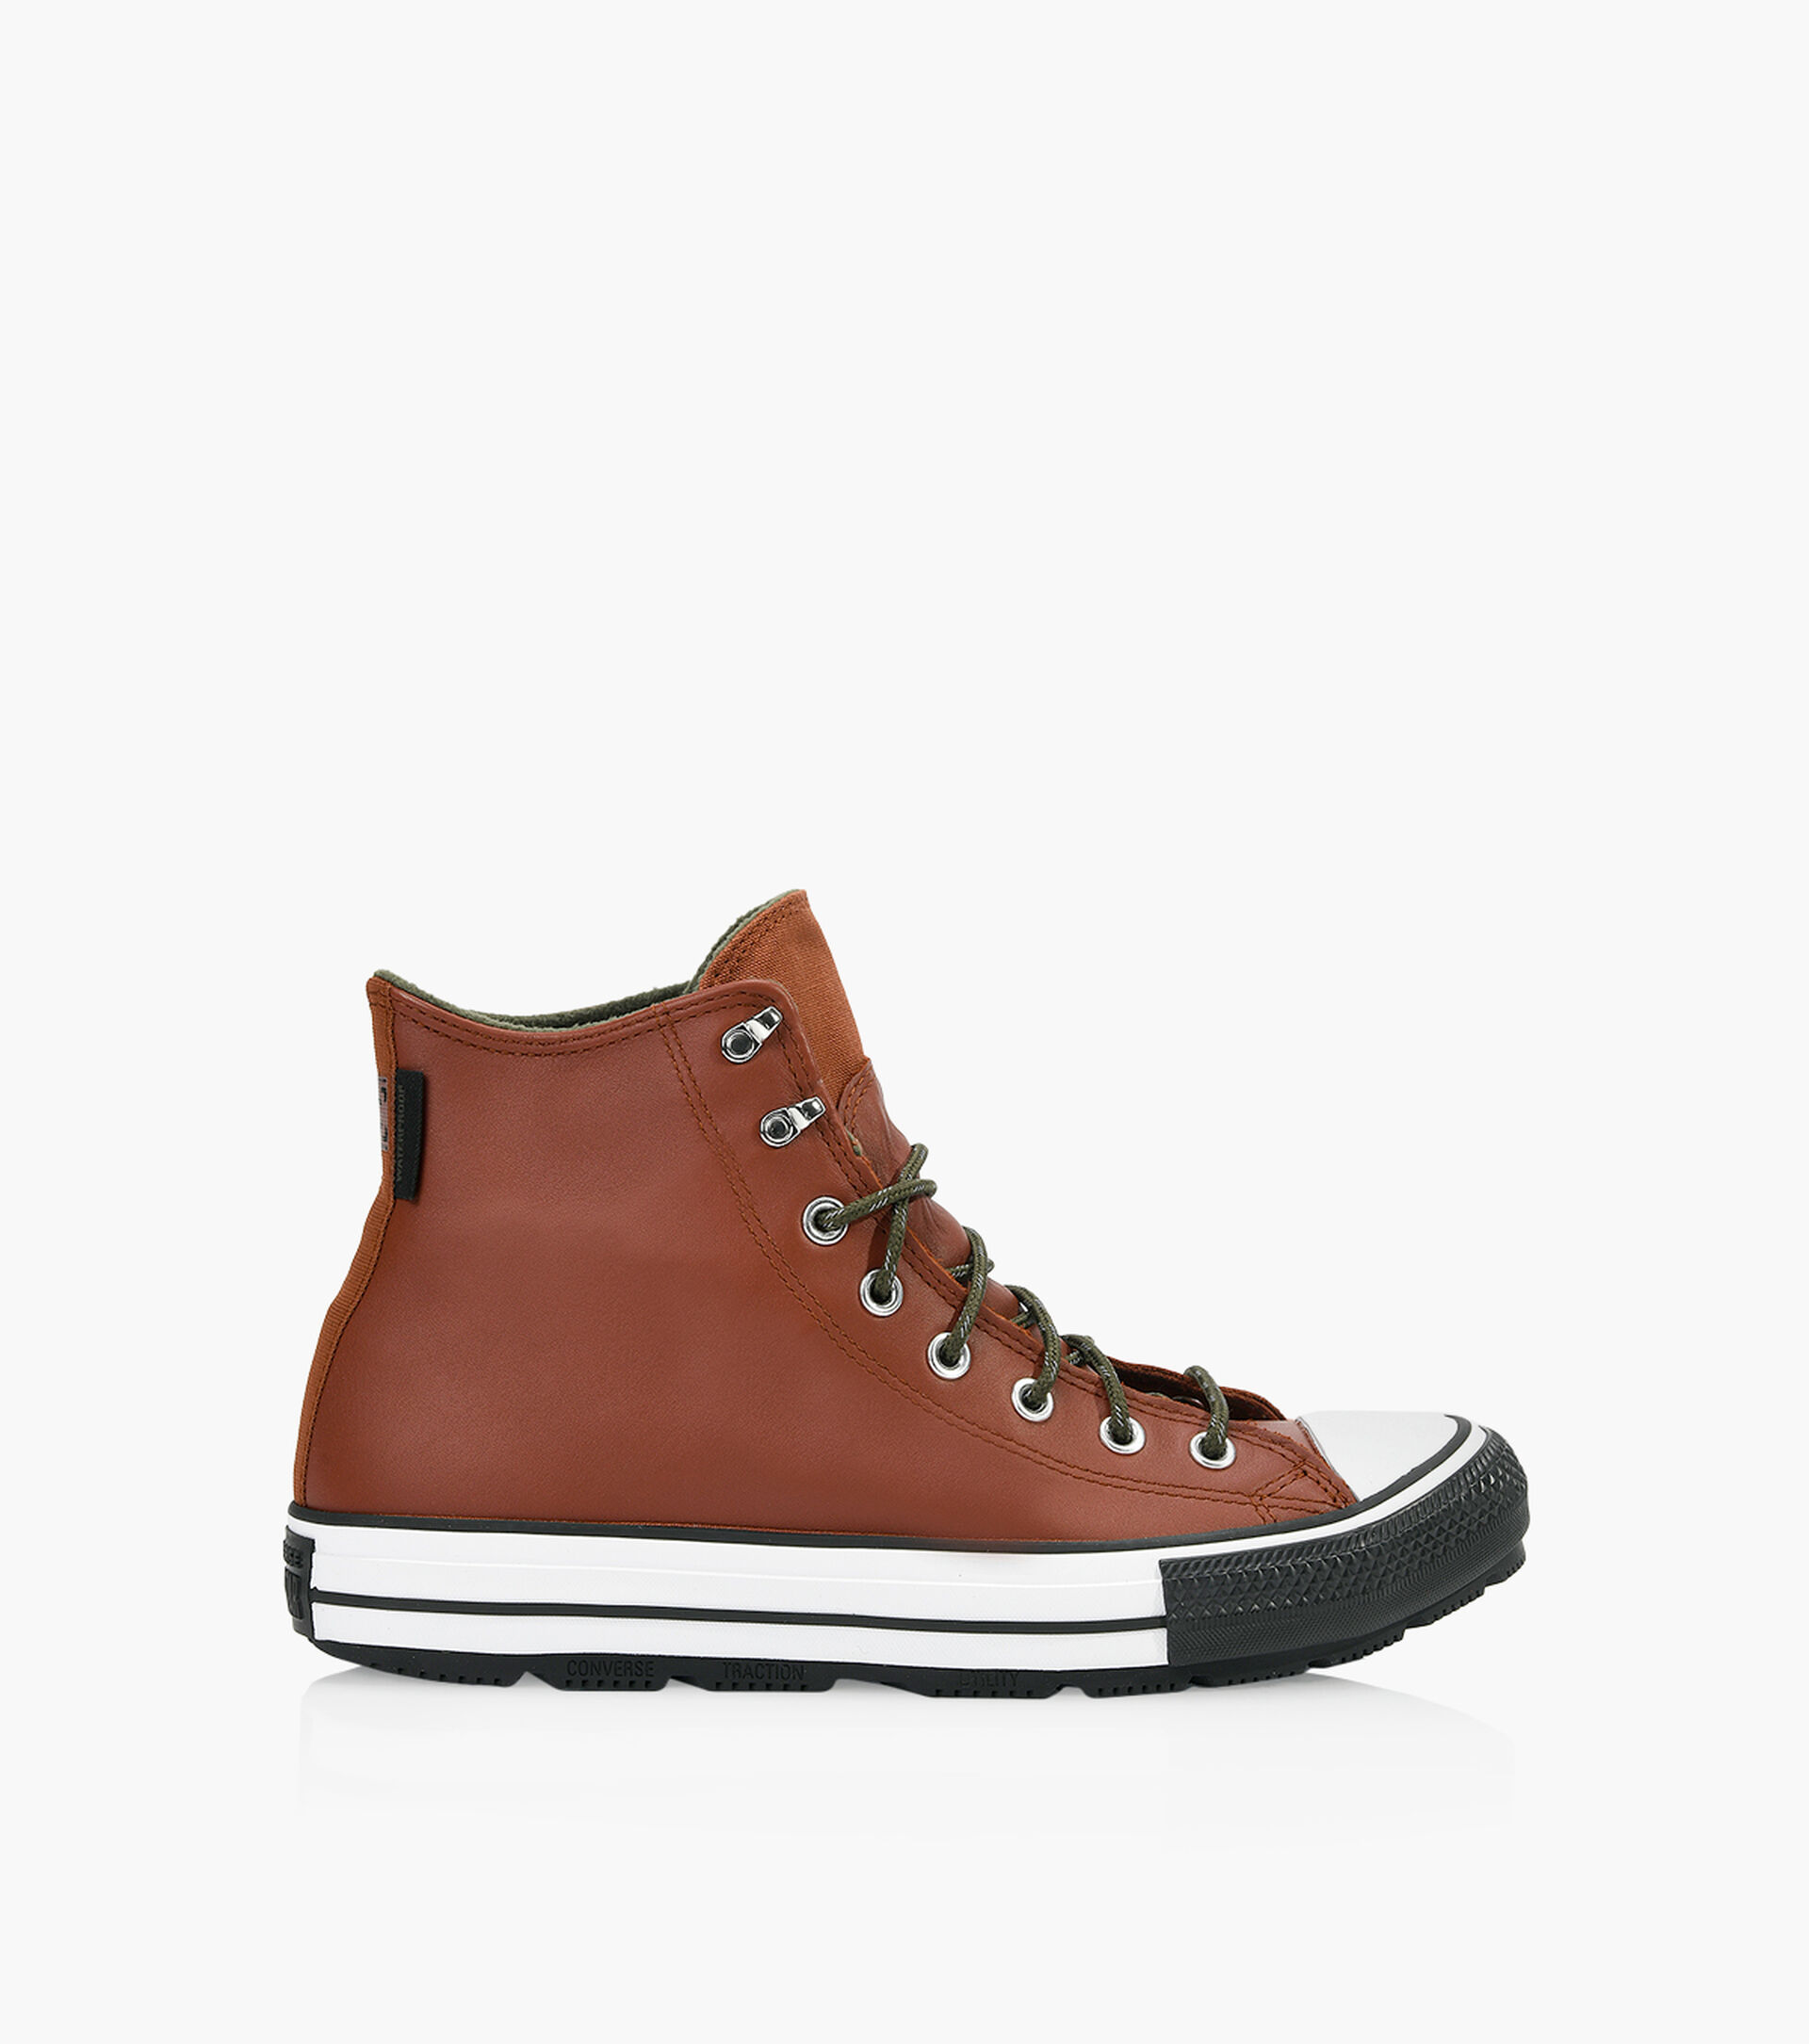 CONVERSE CHUCK TAYLOR ALL STAR WINTER WATERPROOF - Leather | Browns Shoes